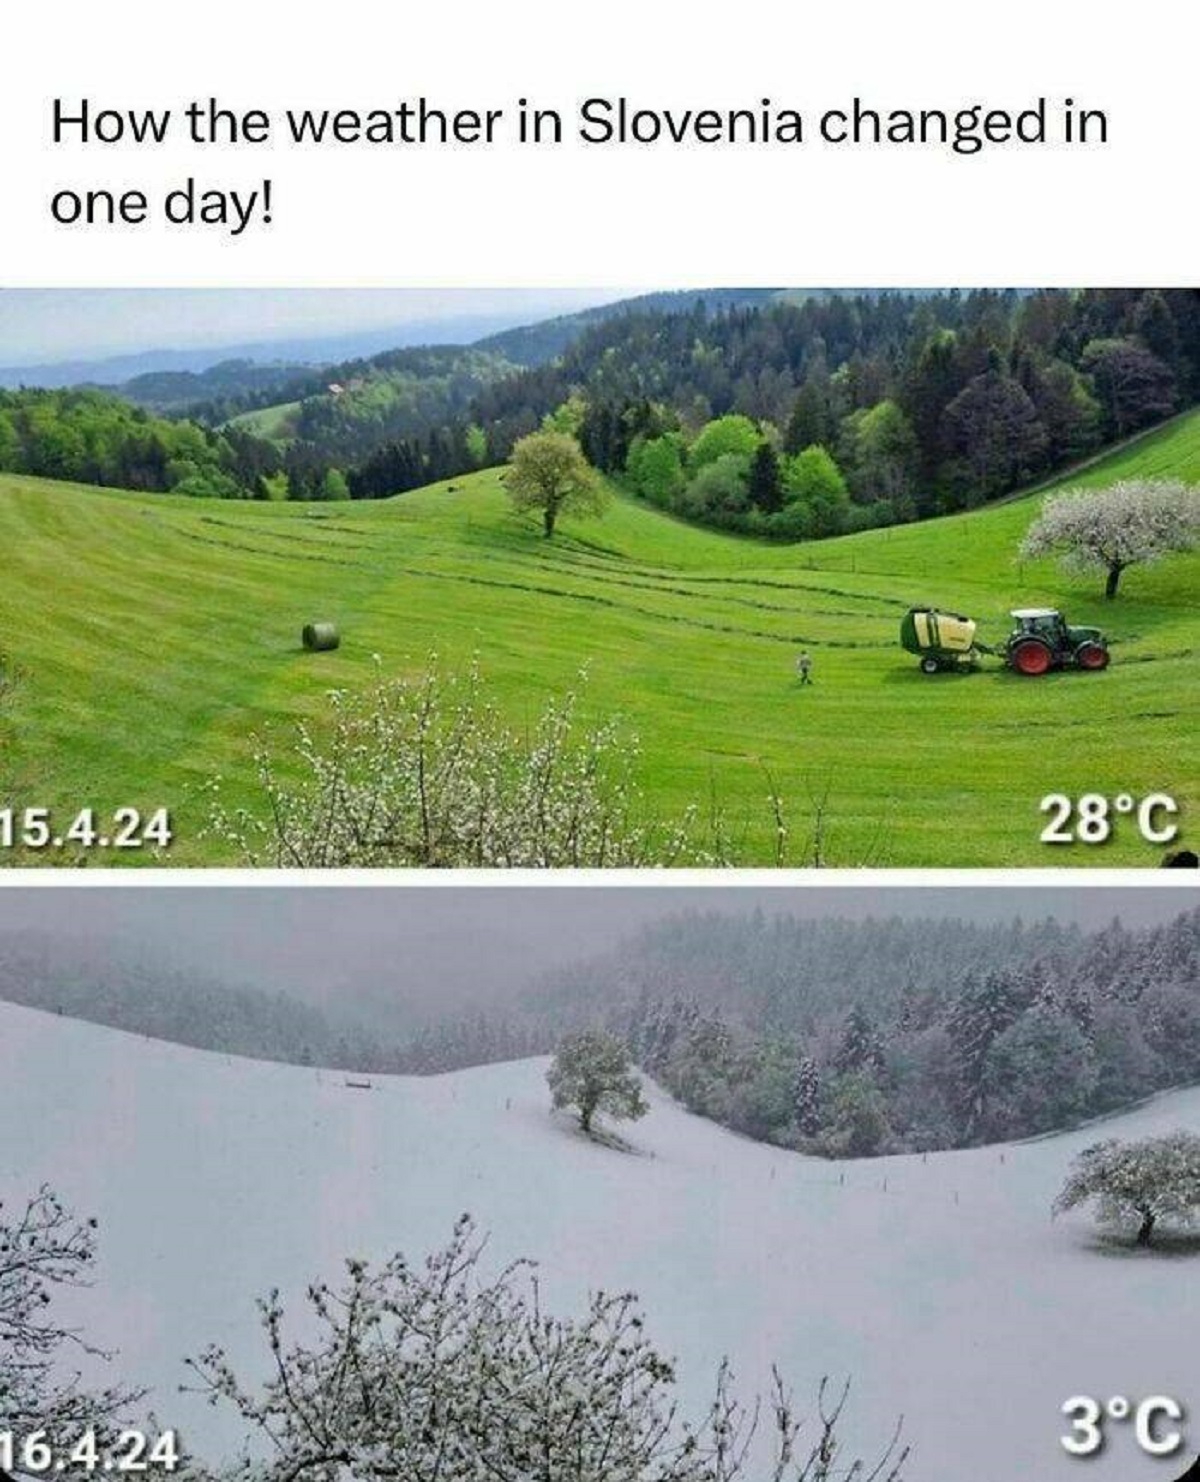 slovenia temperature drop - How the weather in Slovenia changed in one day! 15.4.24 28C 3C 16.4.24